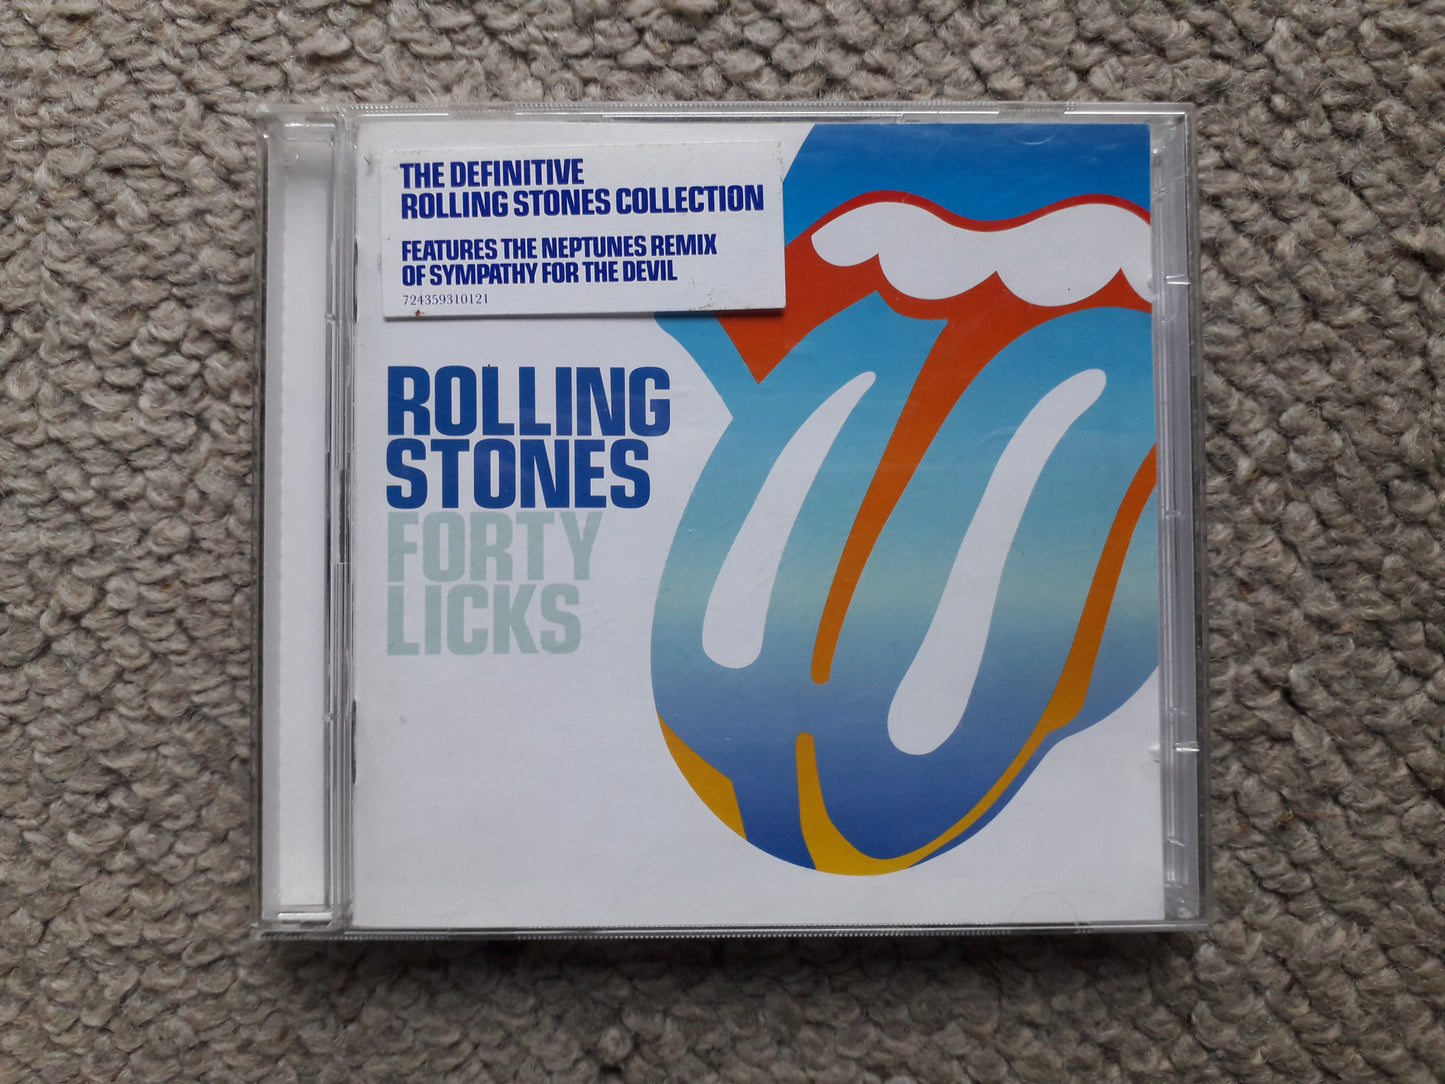 Rolling Stones-Forty Licks Double CD (724359310121)